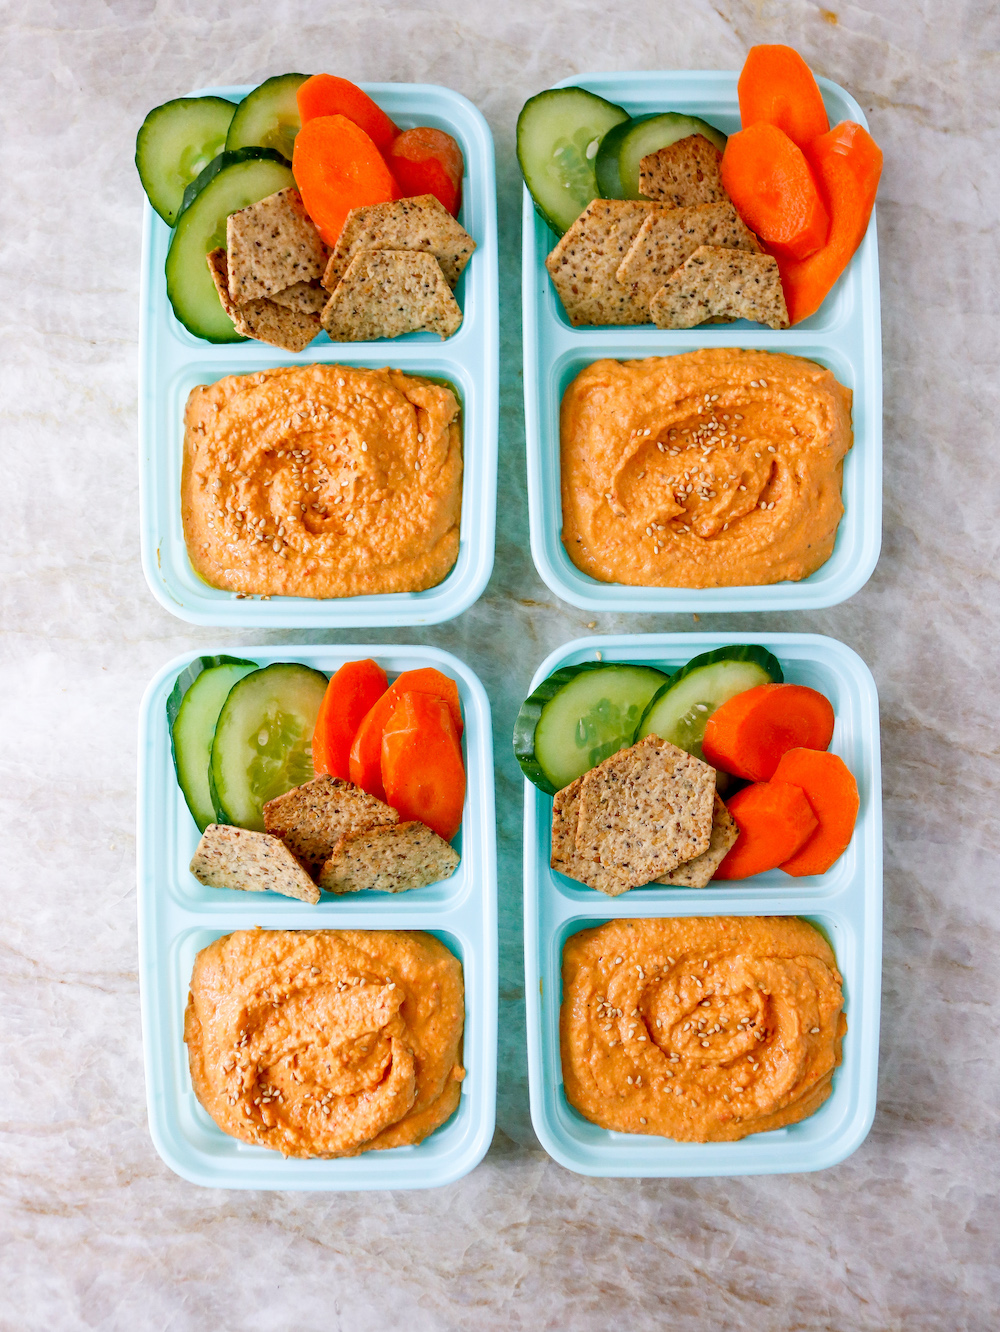 Roasted Red Pepper Hummus Snack Boxes